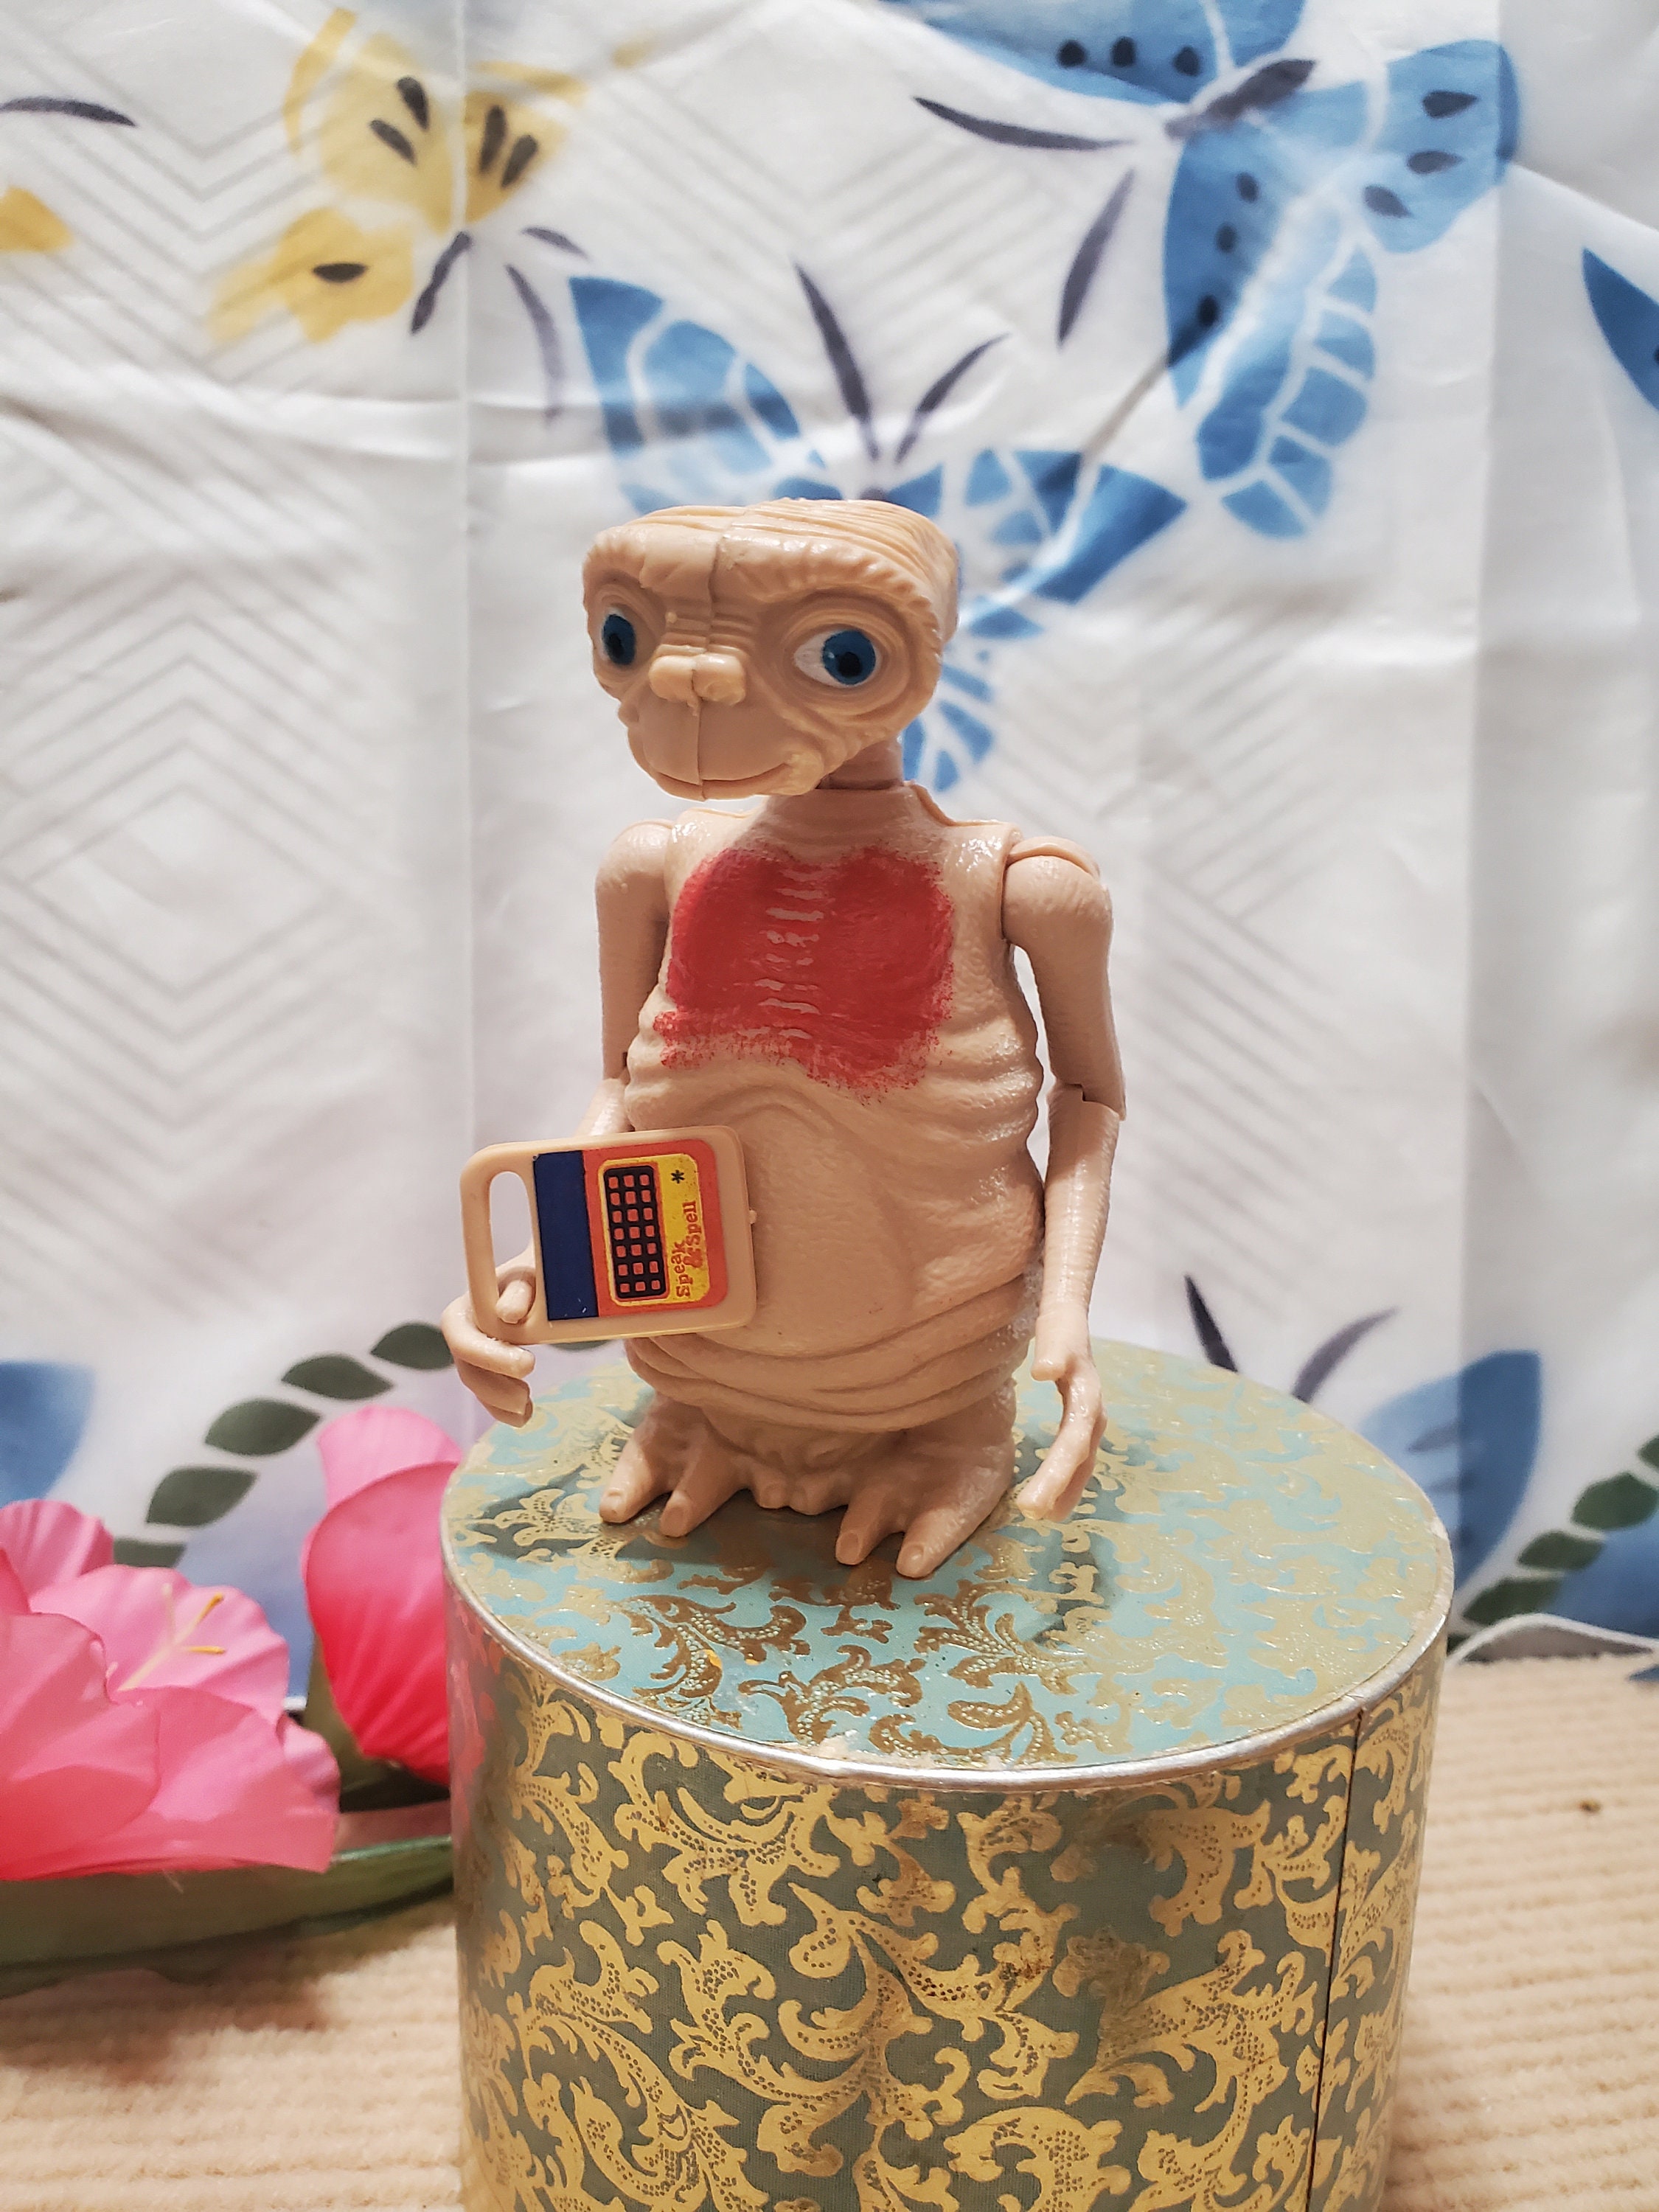 ET The Extraterrestrial Figure, Articulated, Extending Neck Toy, E.T.